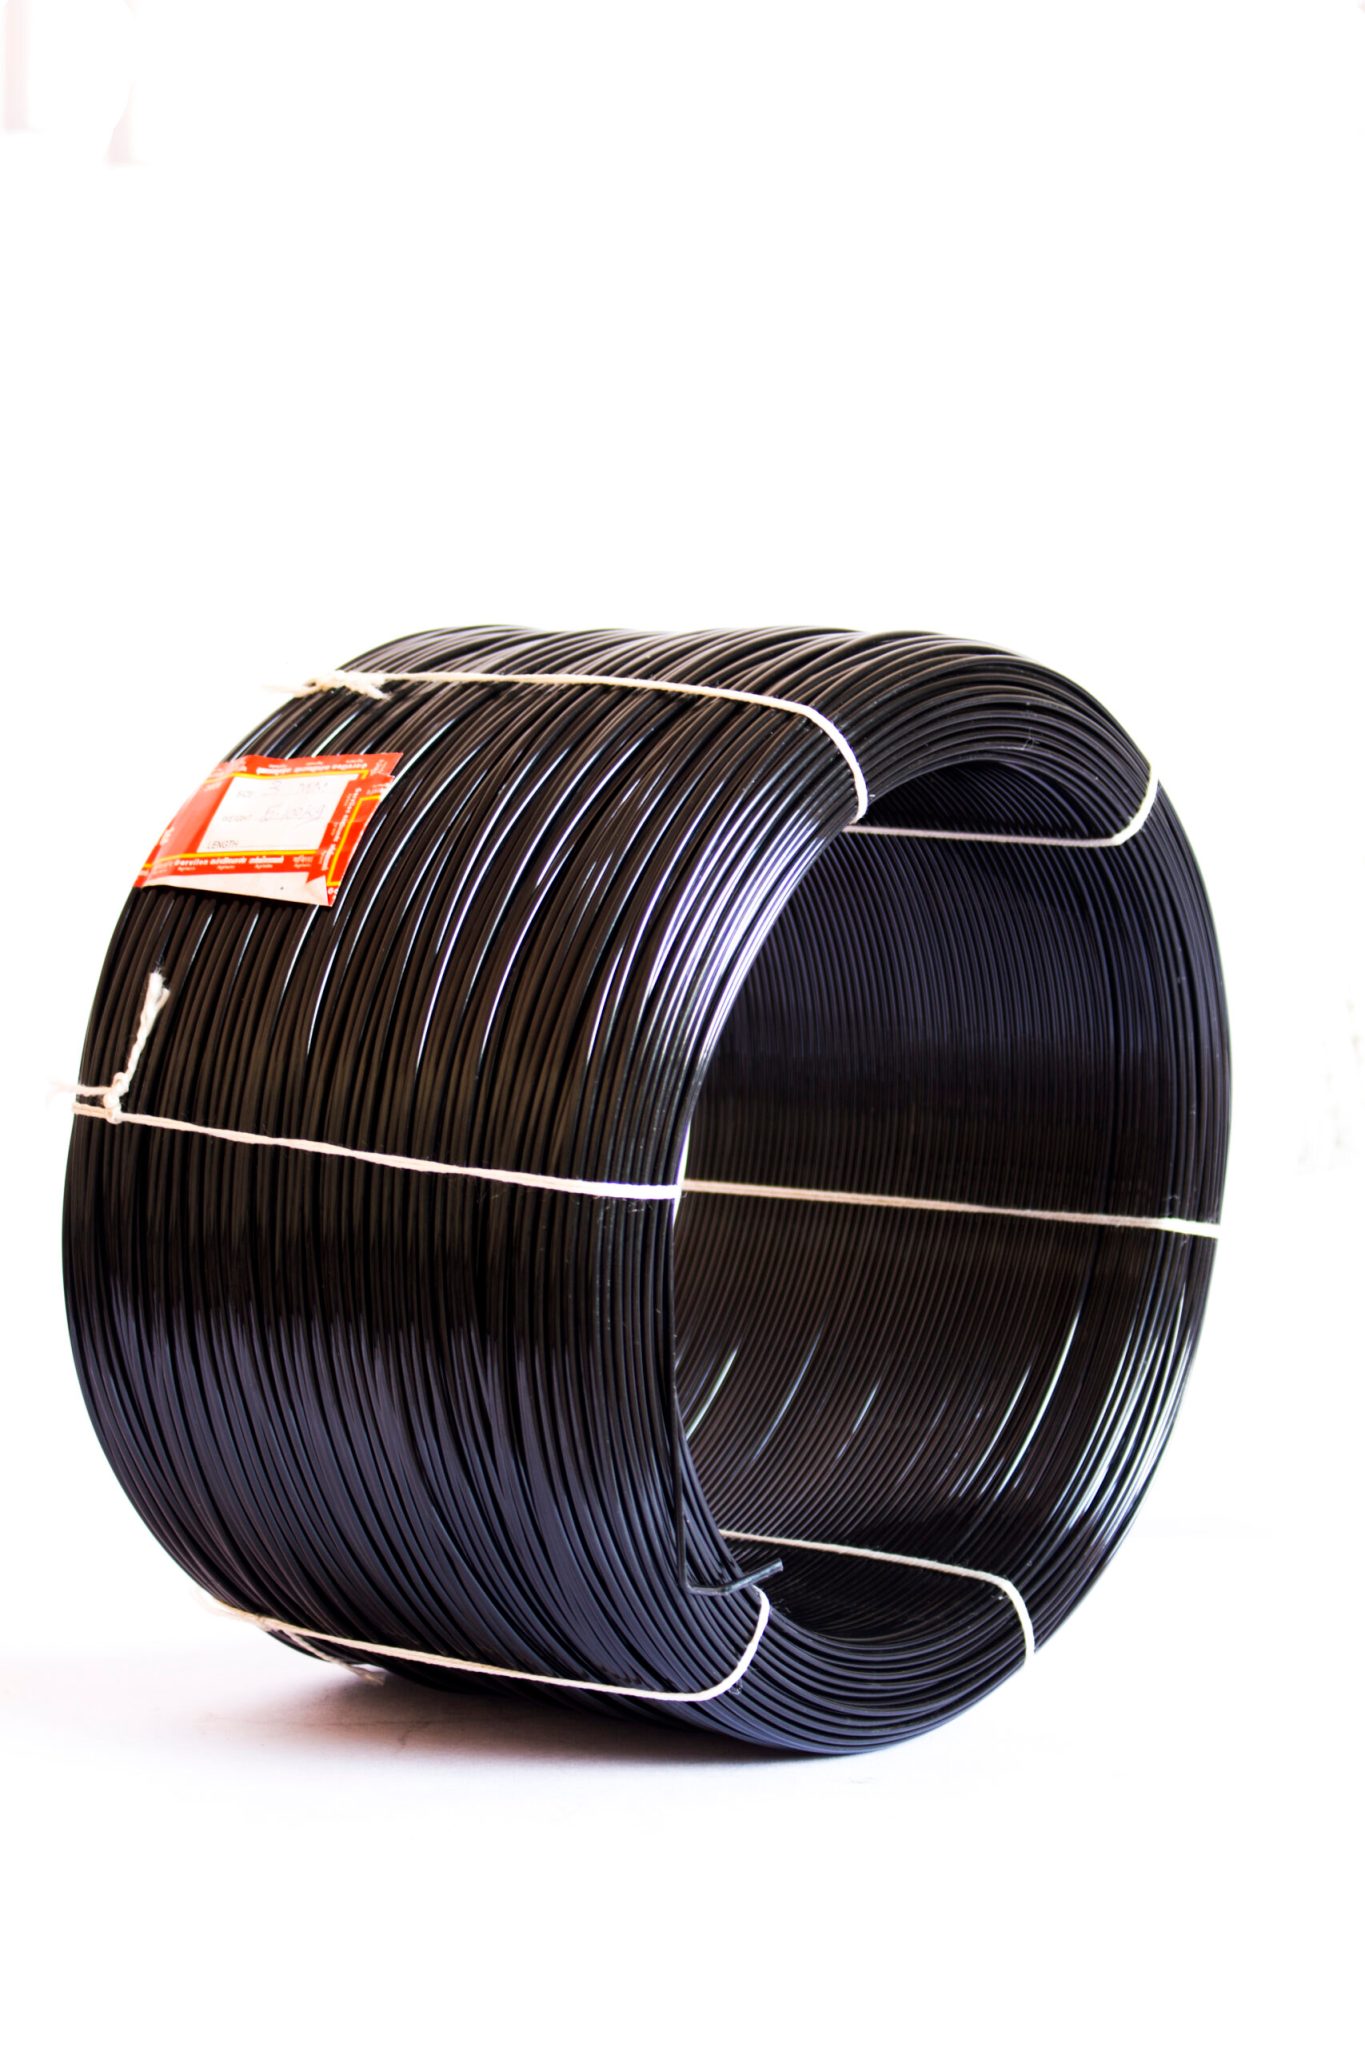 AGRI WIRE